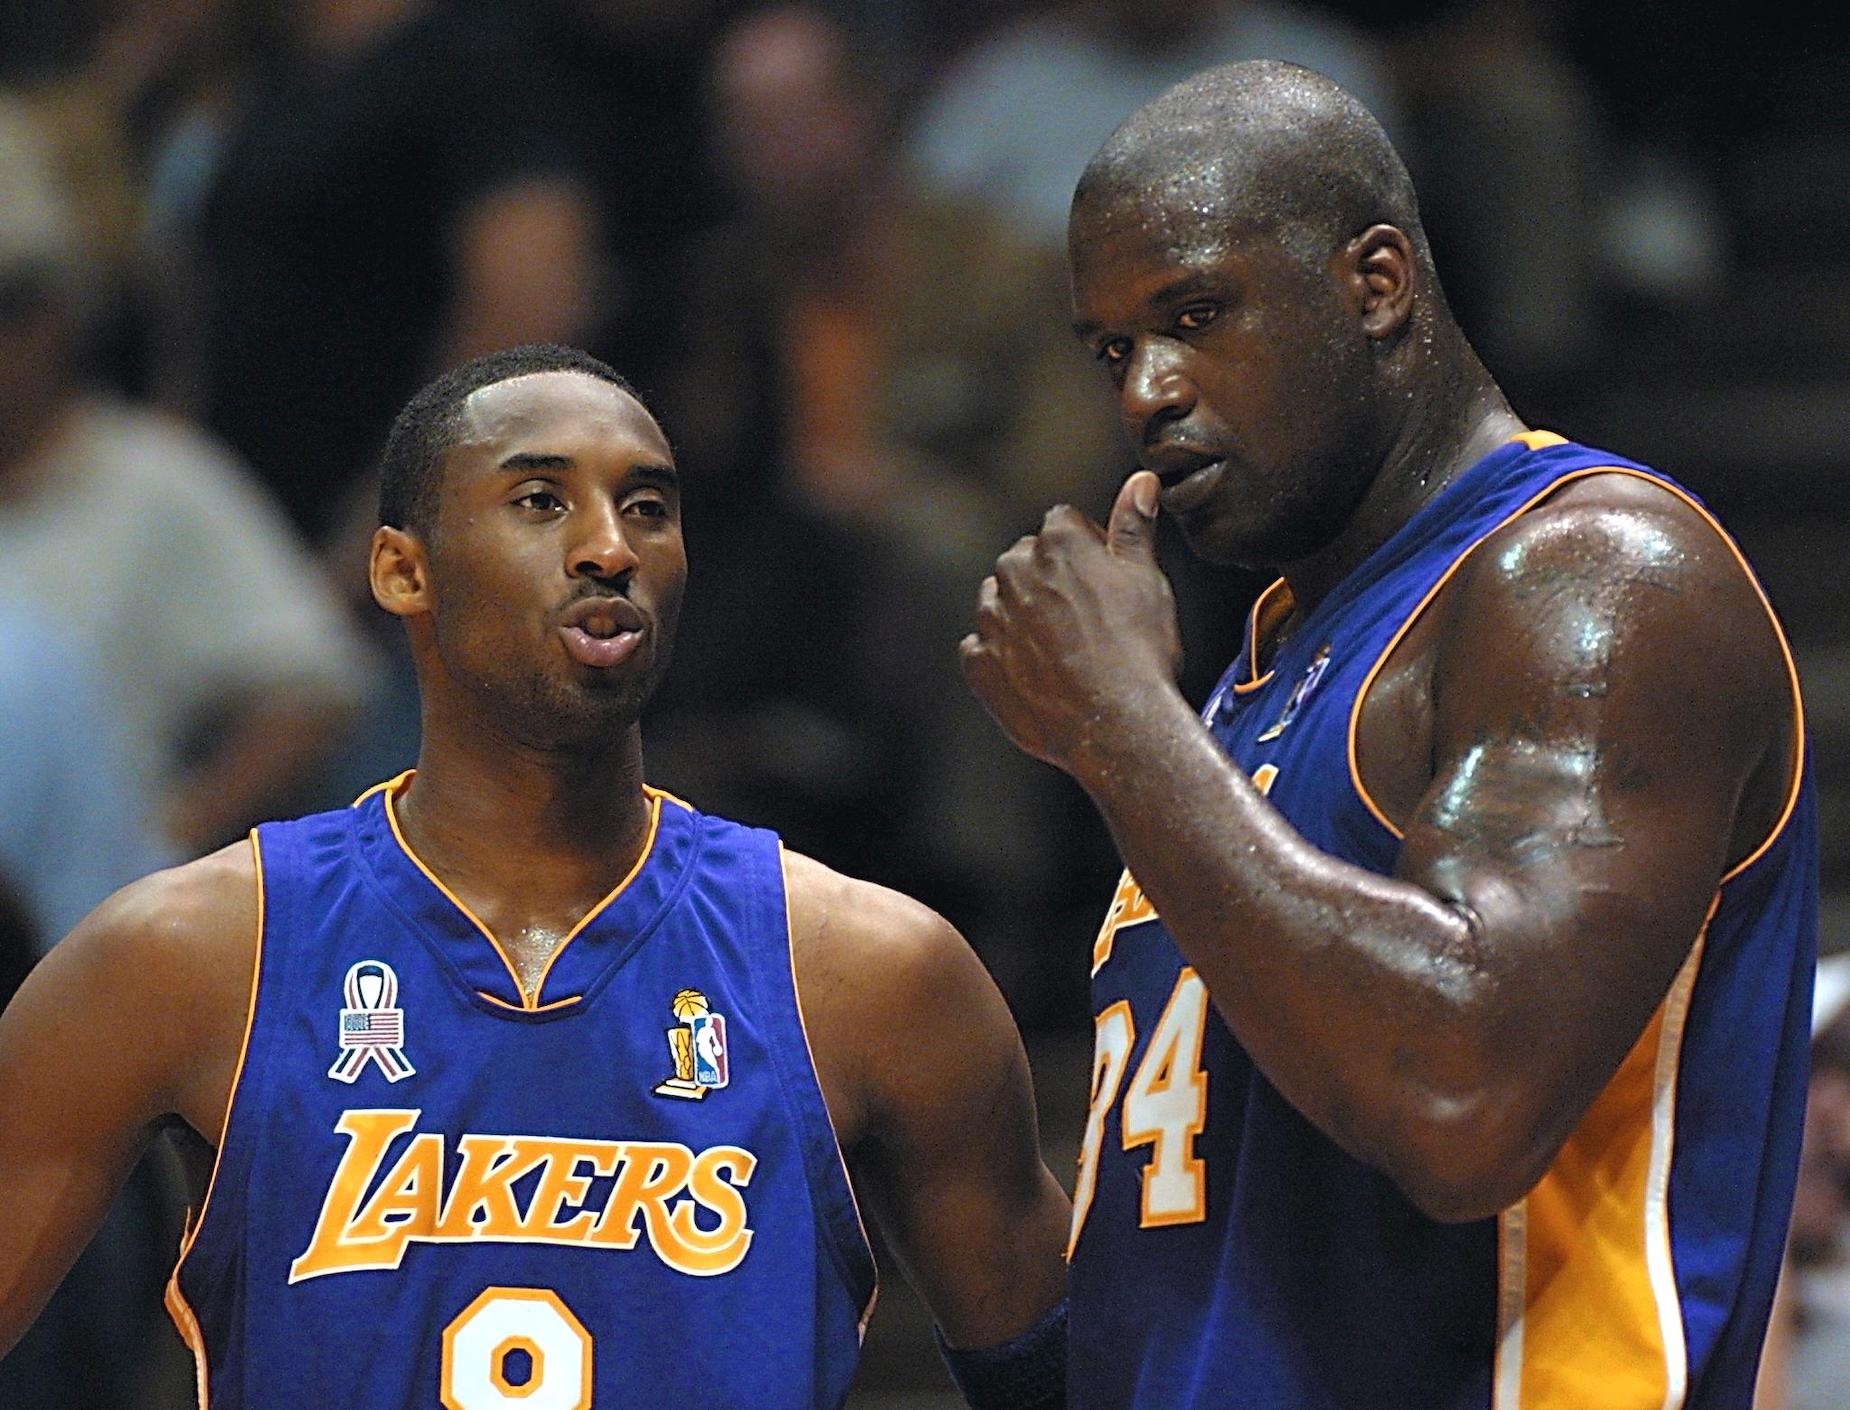 Lakers stars Kobe Bryant (L) and Shaquille O'Neal (R) talk during the 2002 NBA Finals.